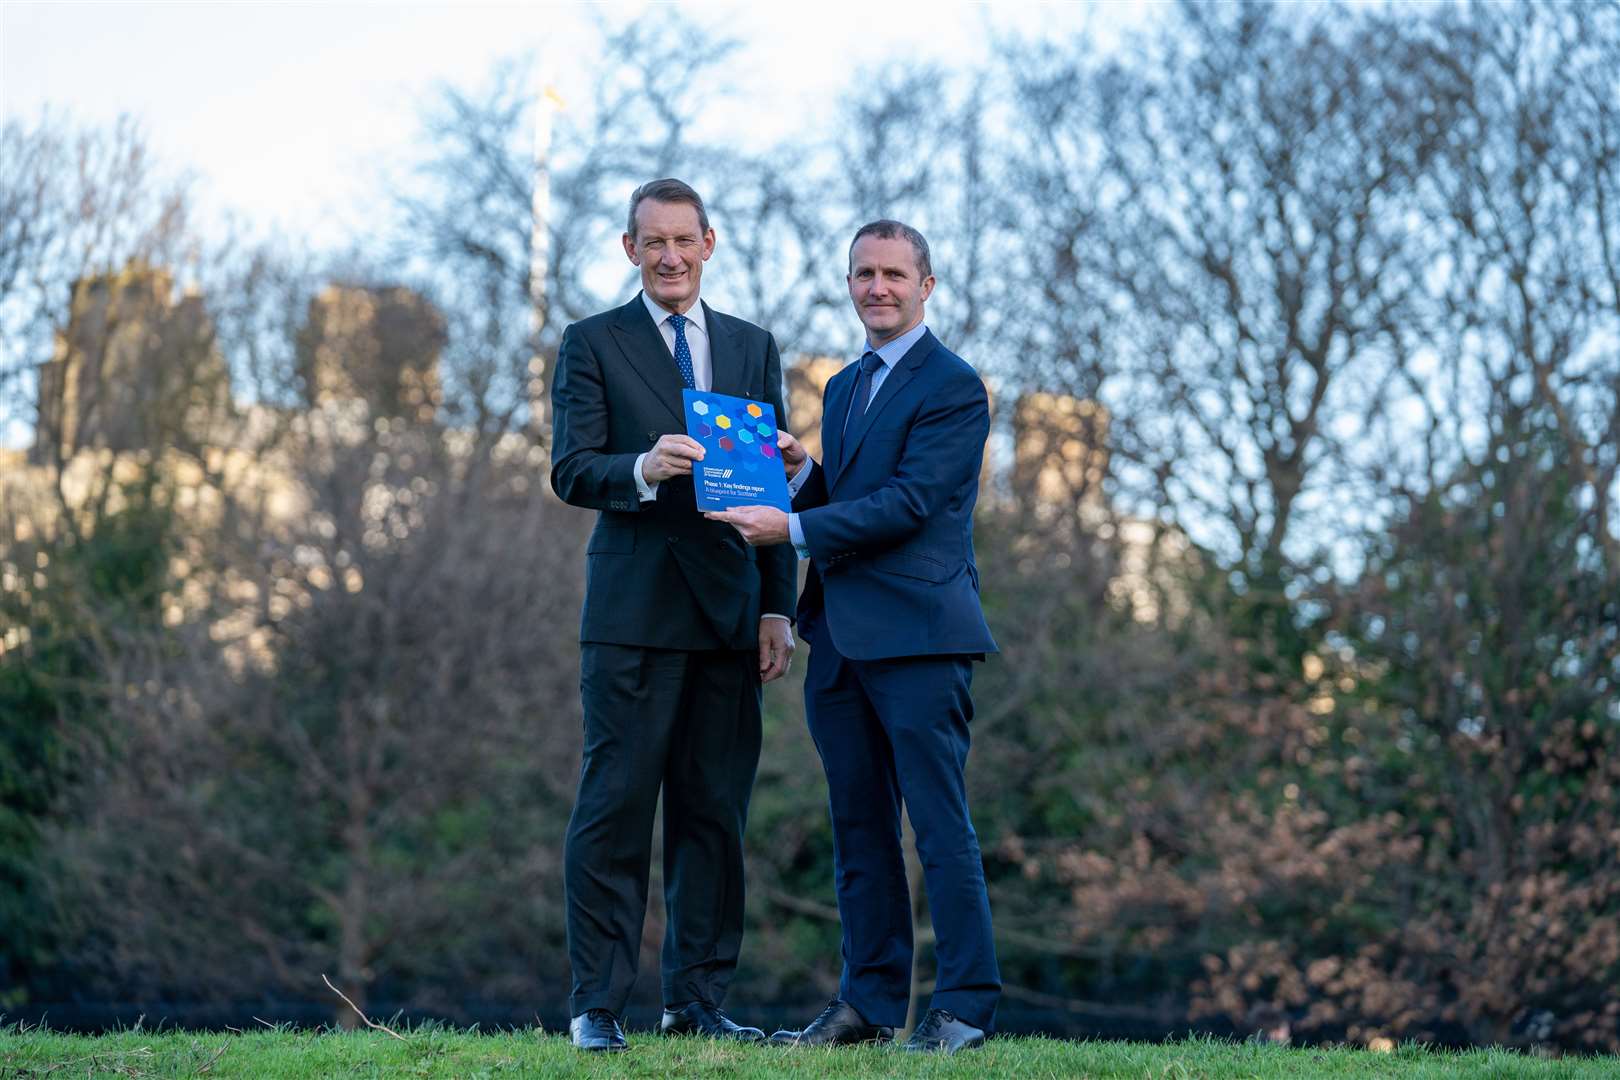 Ian Russell (left), chair of the Infrastructure Commission for Scotland, with cabinet secretary for connectivity Michael Matheson at the launch of the report. Pic Kenny Smith, Kenny Smith PhotographyTel 07809 450119